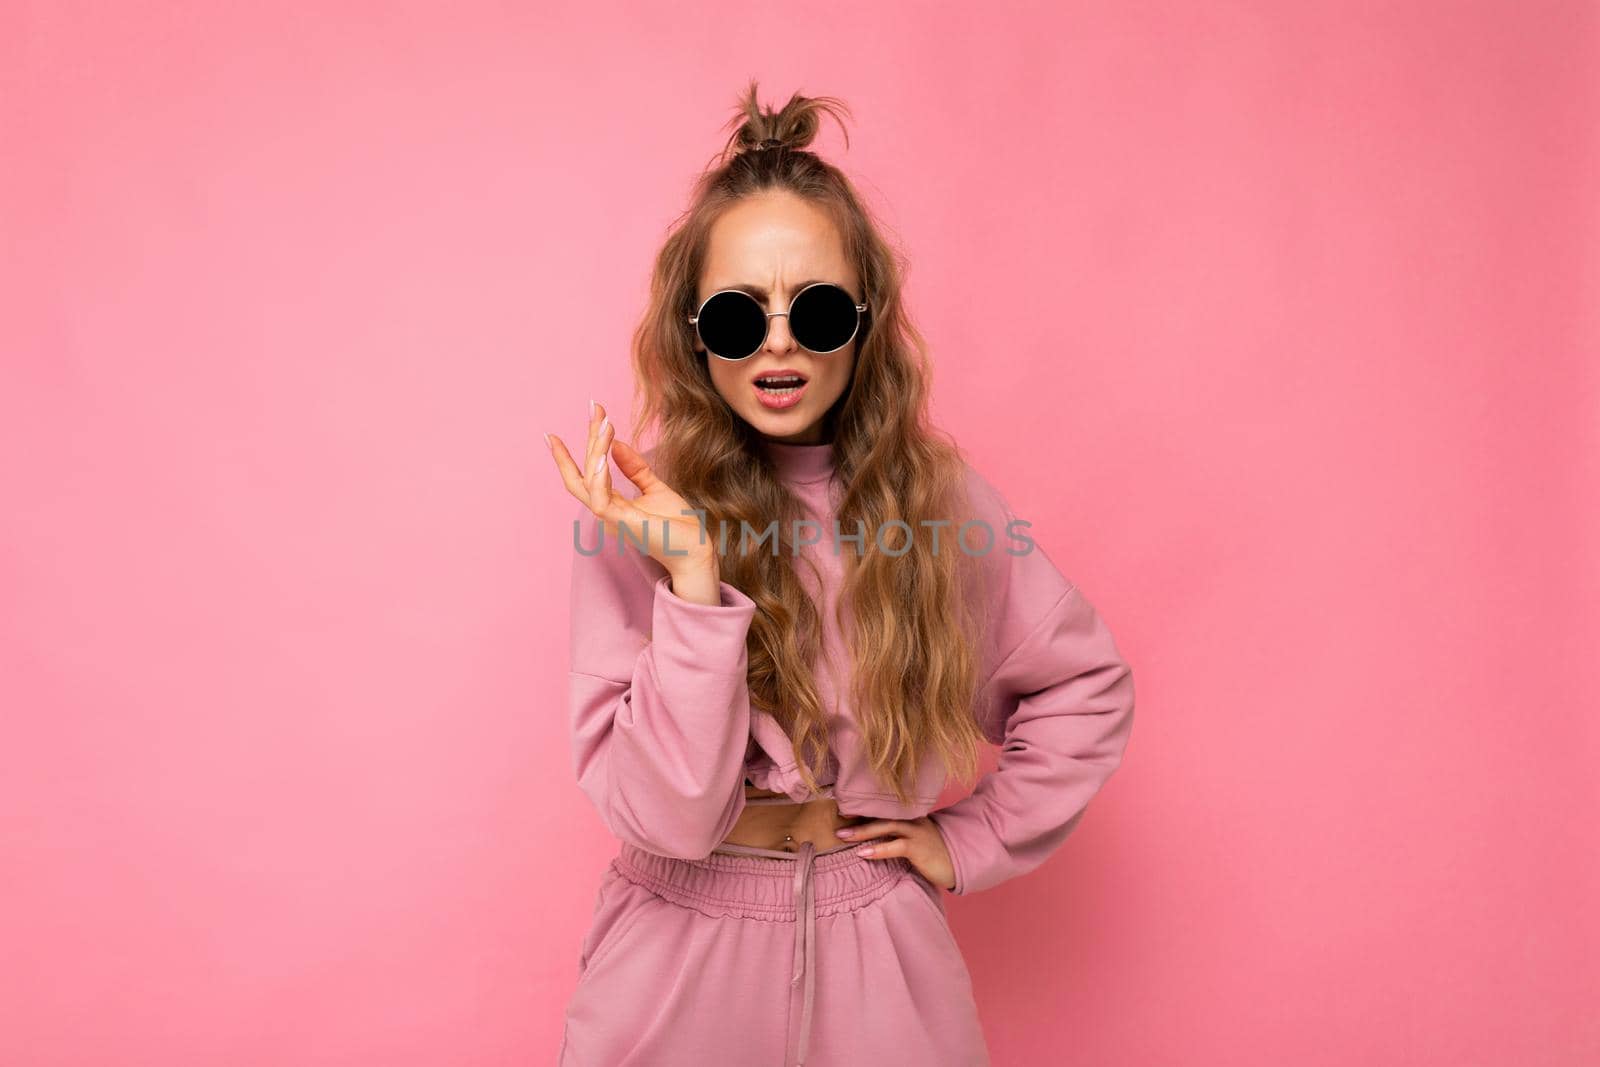 Fascinating dissatisfied adult blonde curly woman isolated over pink background wall wearing casual pink sport clothes and stylish sunglasses looking at camera.